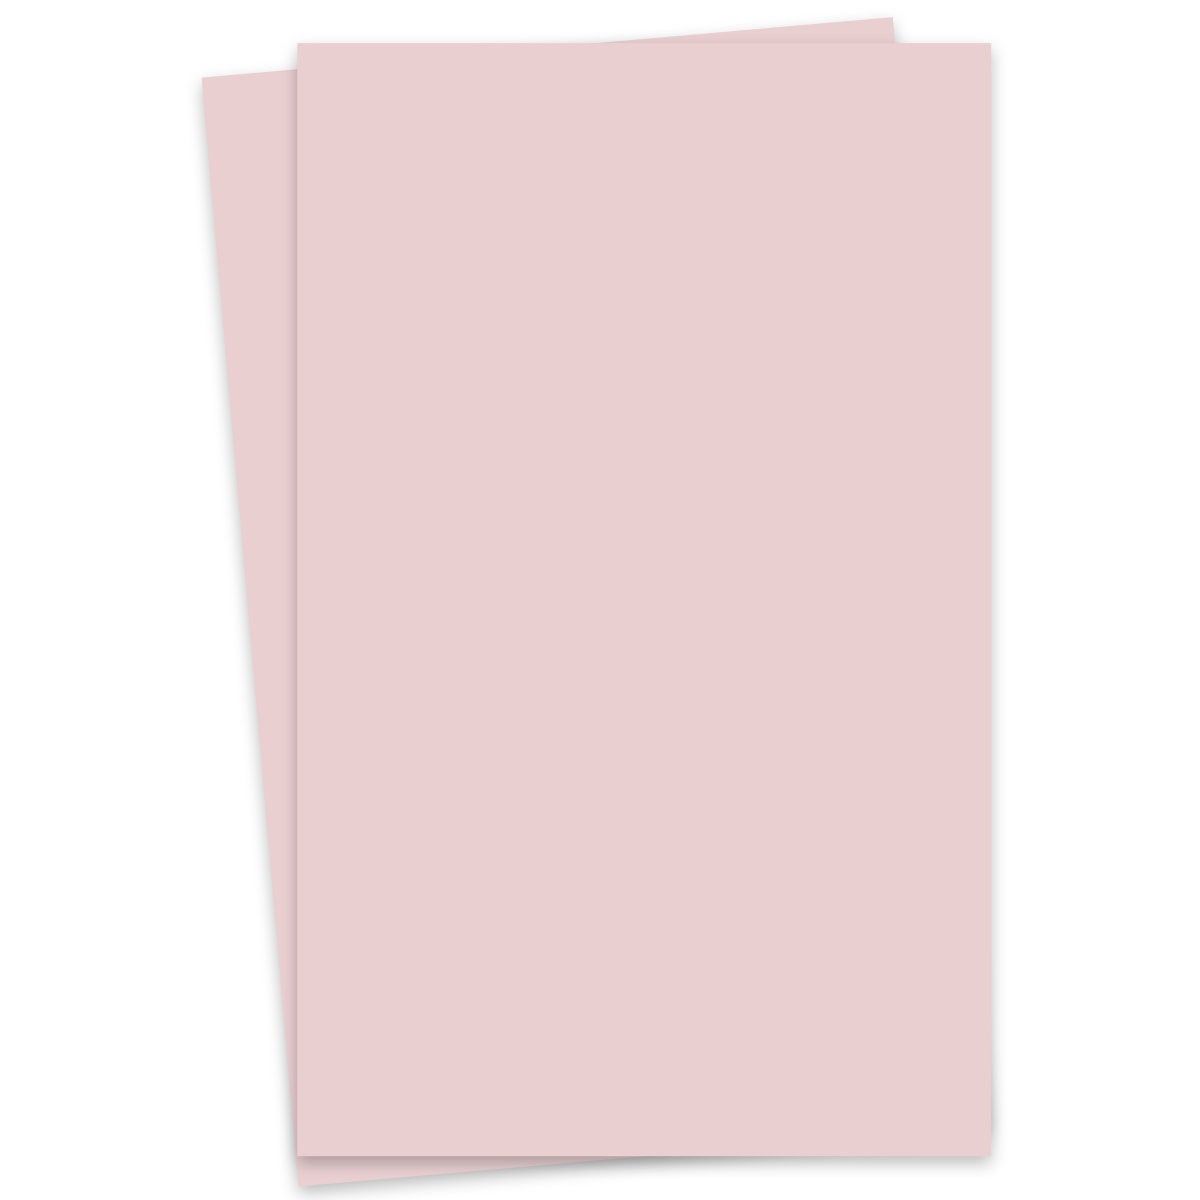 Burano Pink (10) - 11X17 Lightweight Cardstock Paper - 52Lb Cover